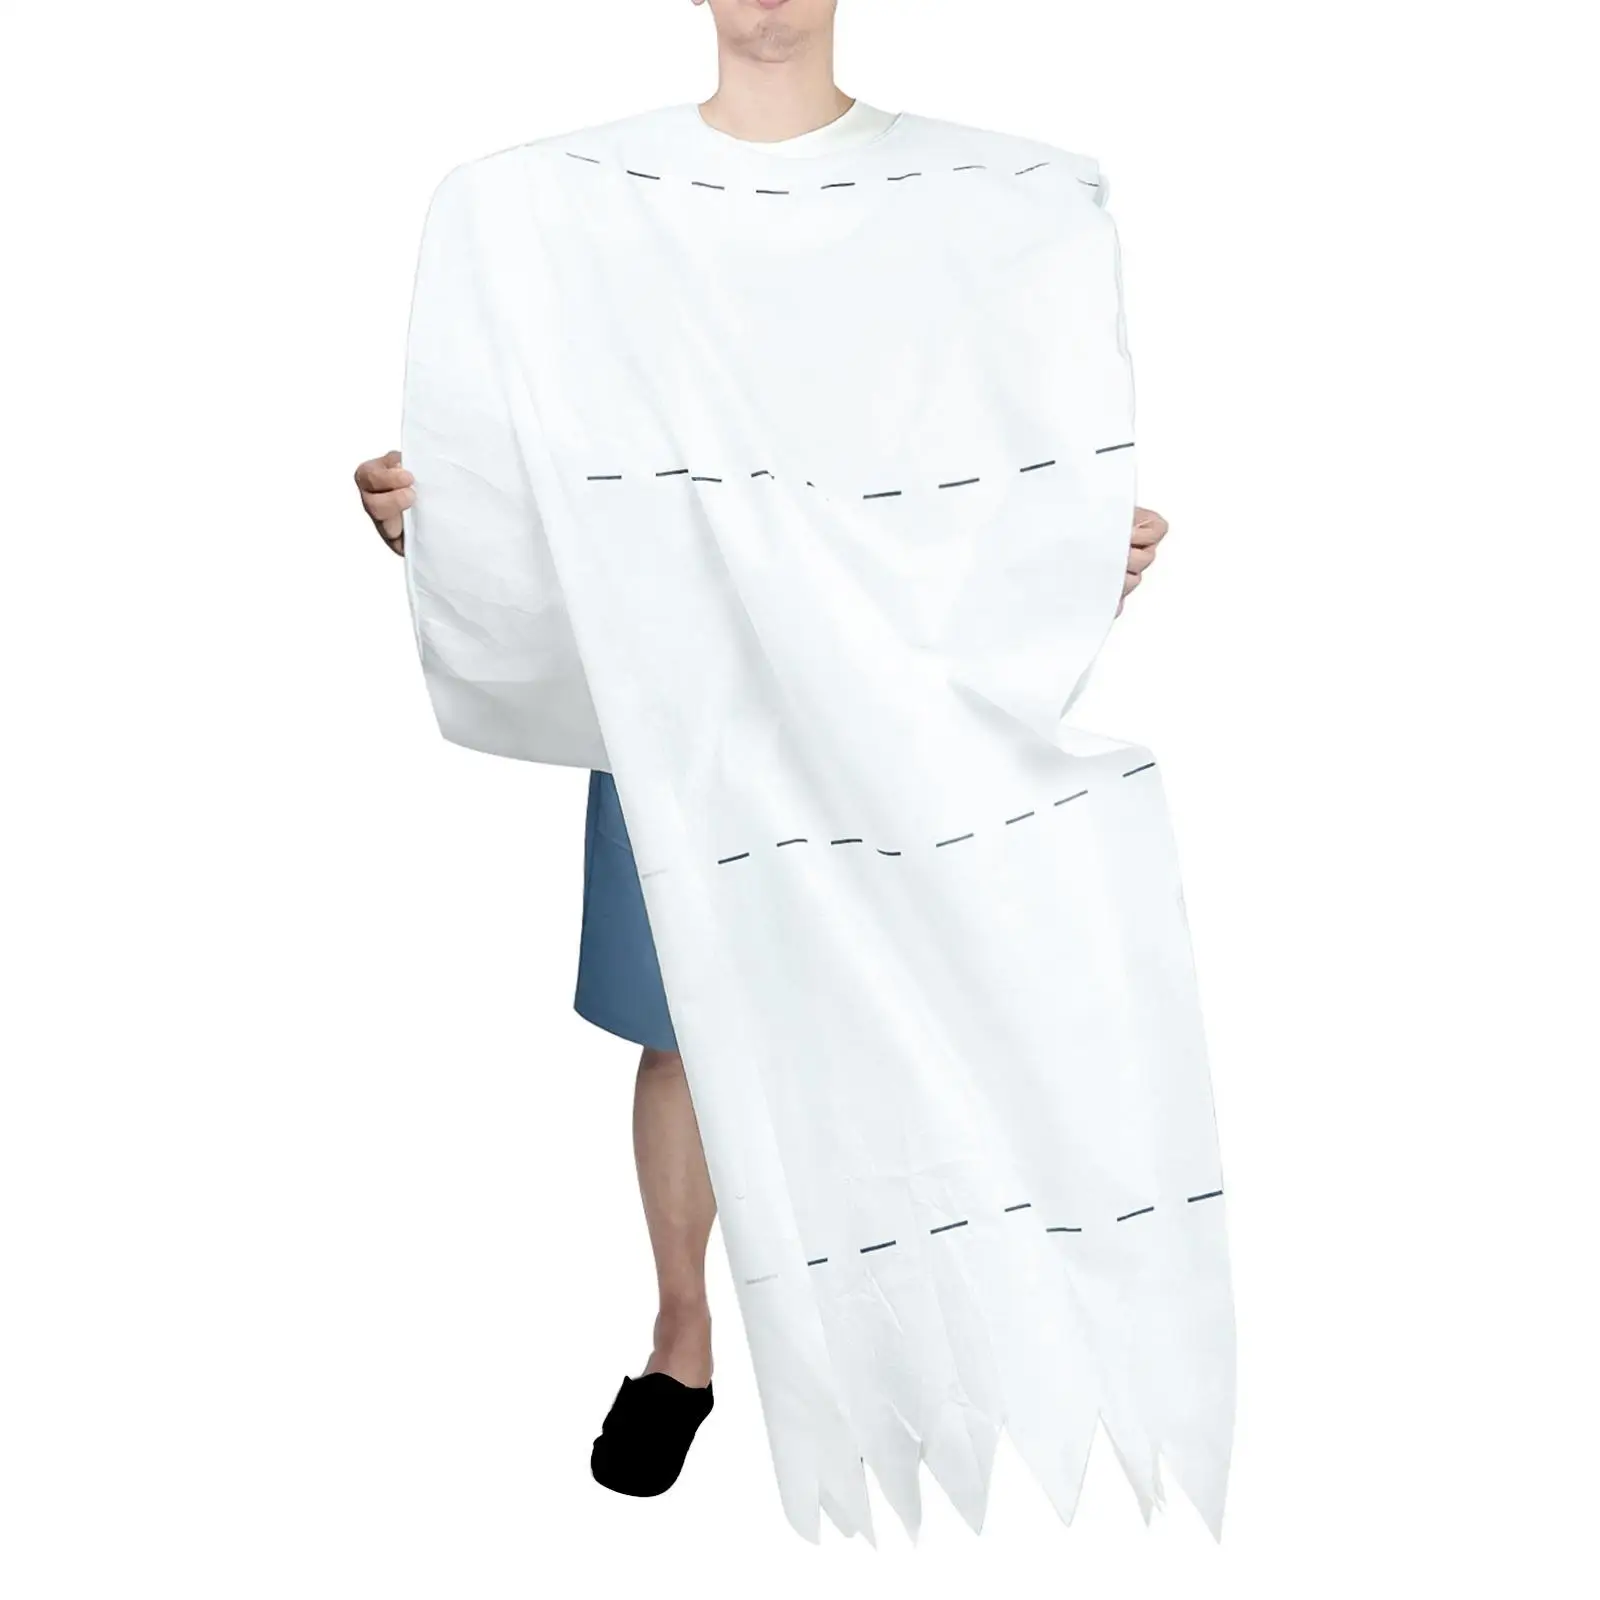 Toilet Tissue Costume Large Roll Cosplay Costume Funny Roll Paper Cosplay Clothing for Stage Halloween Cosplay Adults Couples